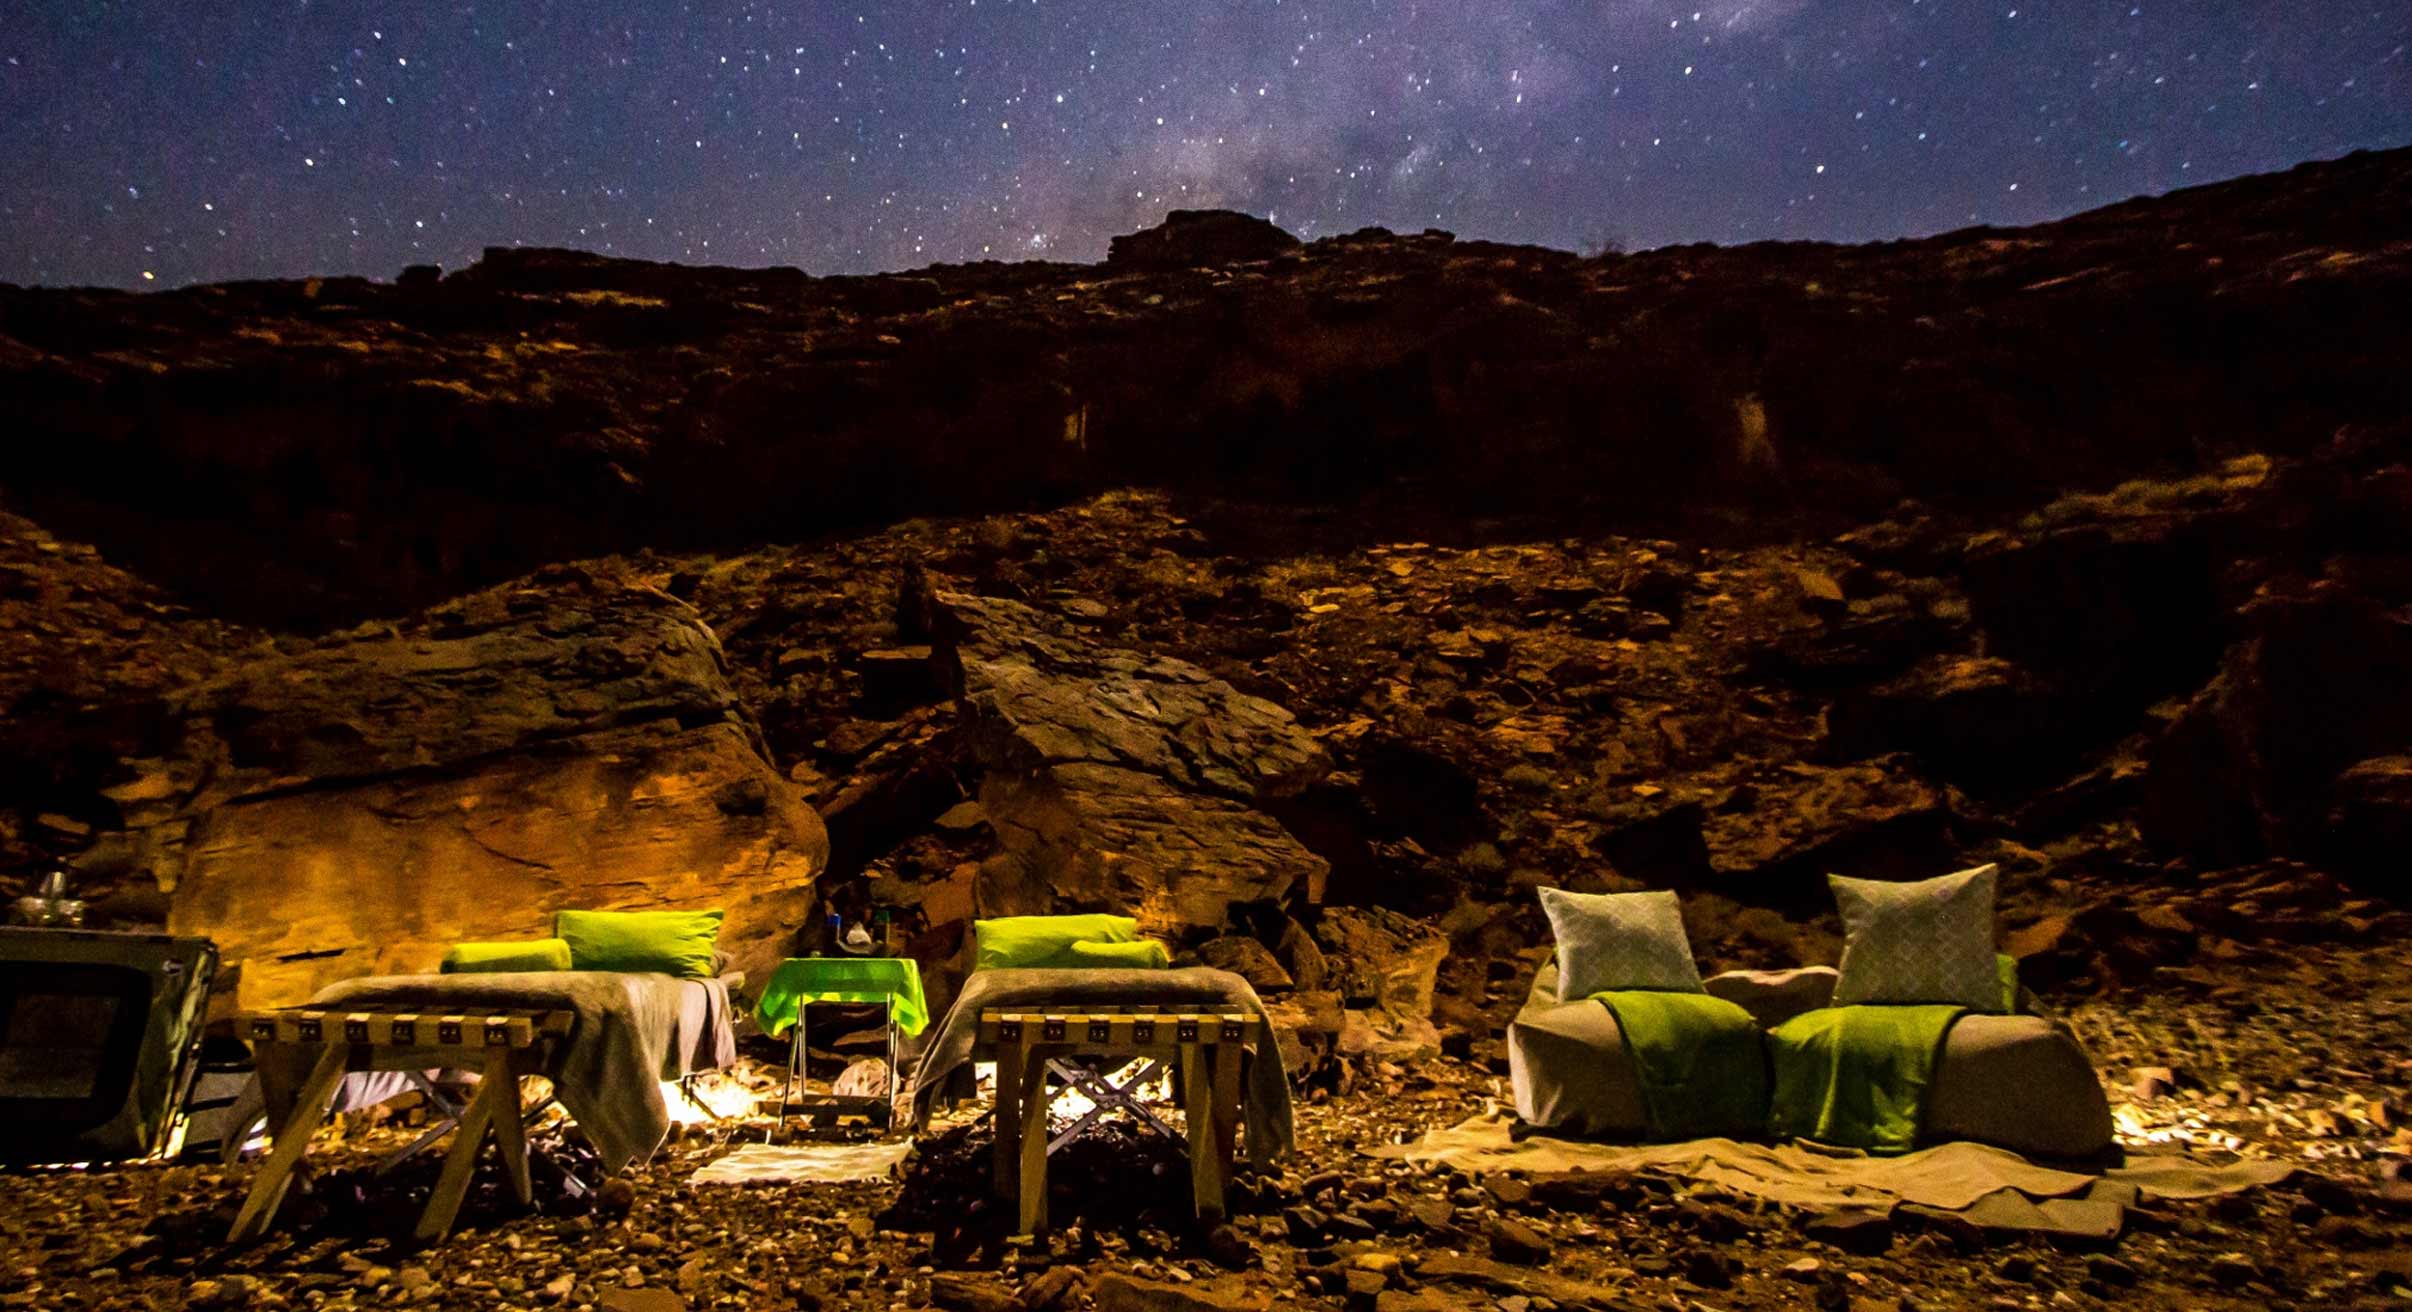 Night sky at Huab under Canvas in Namibia